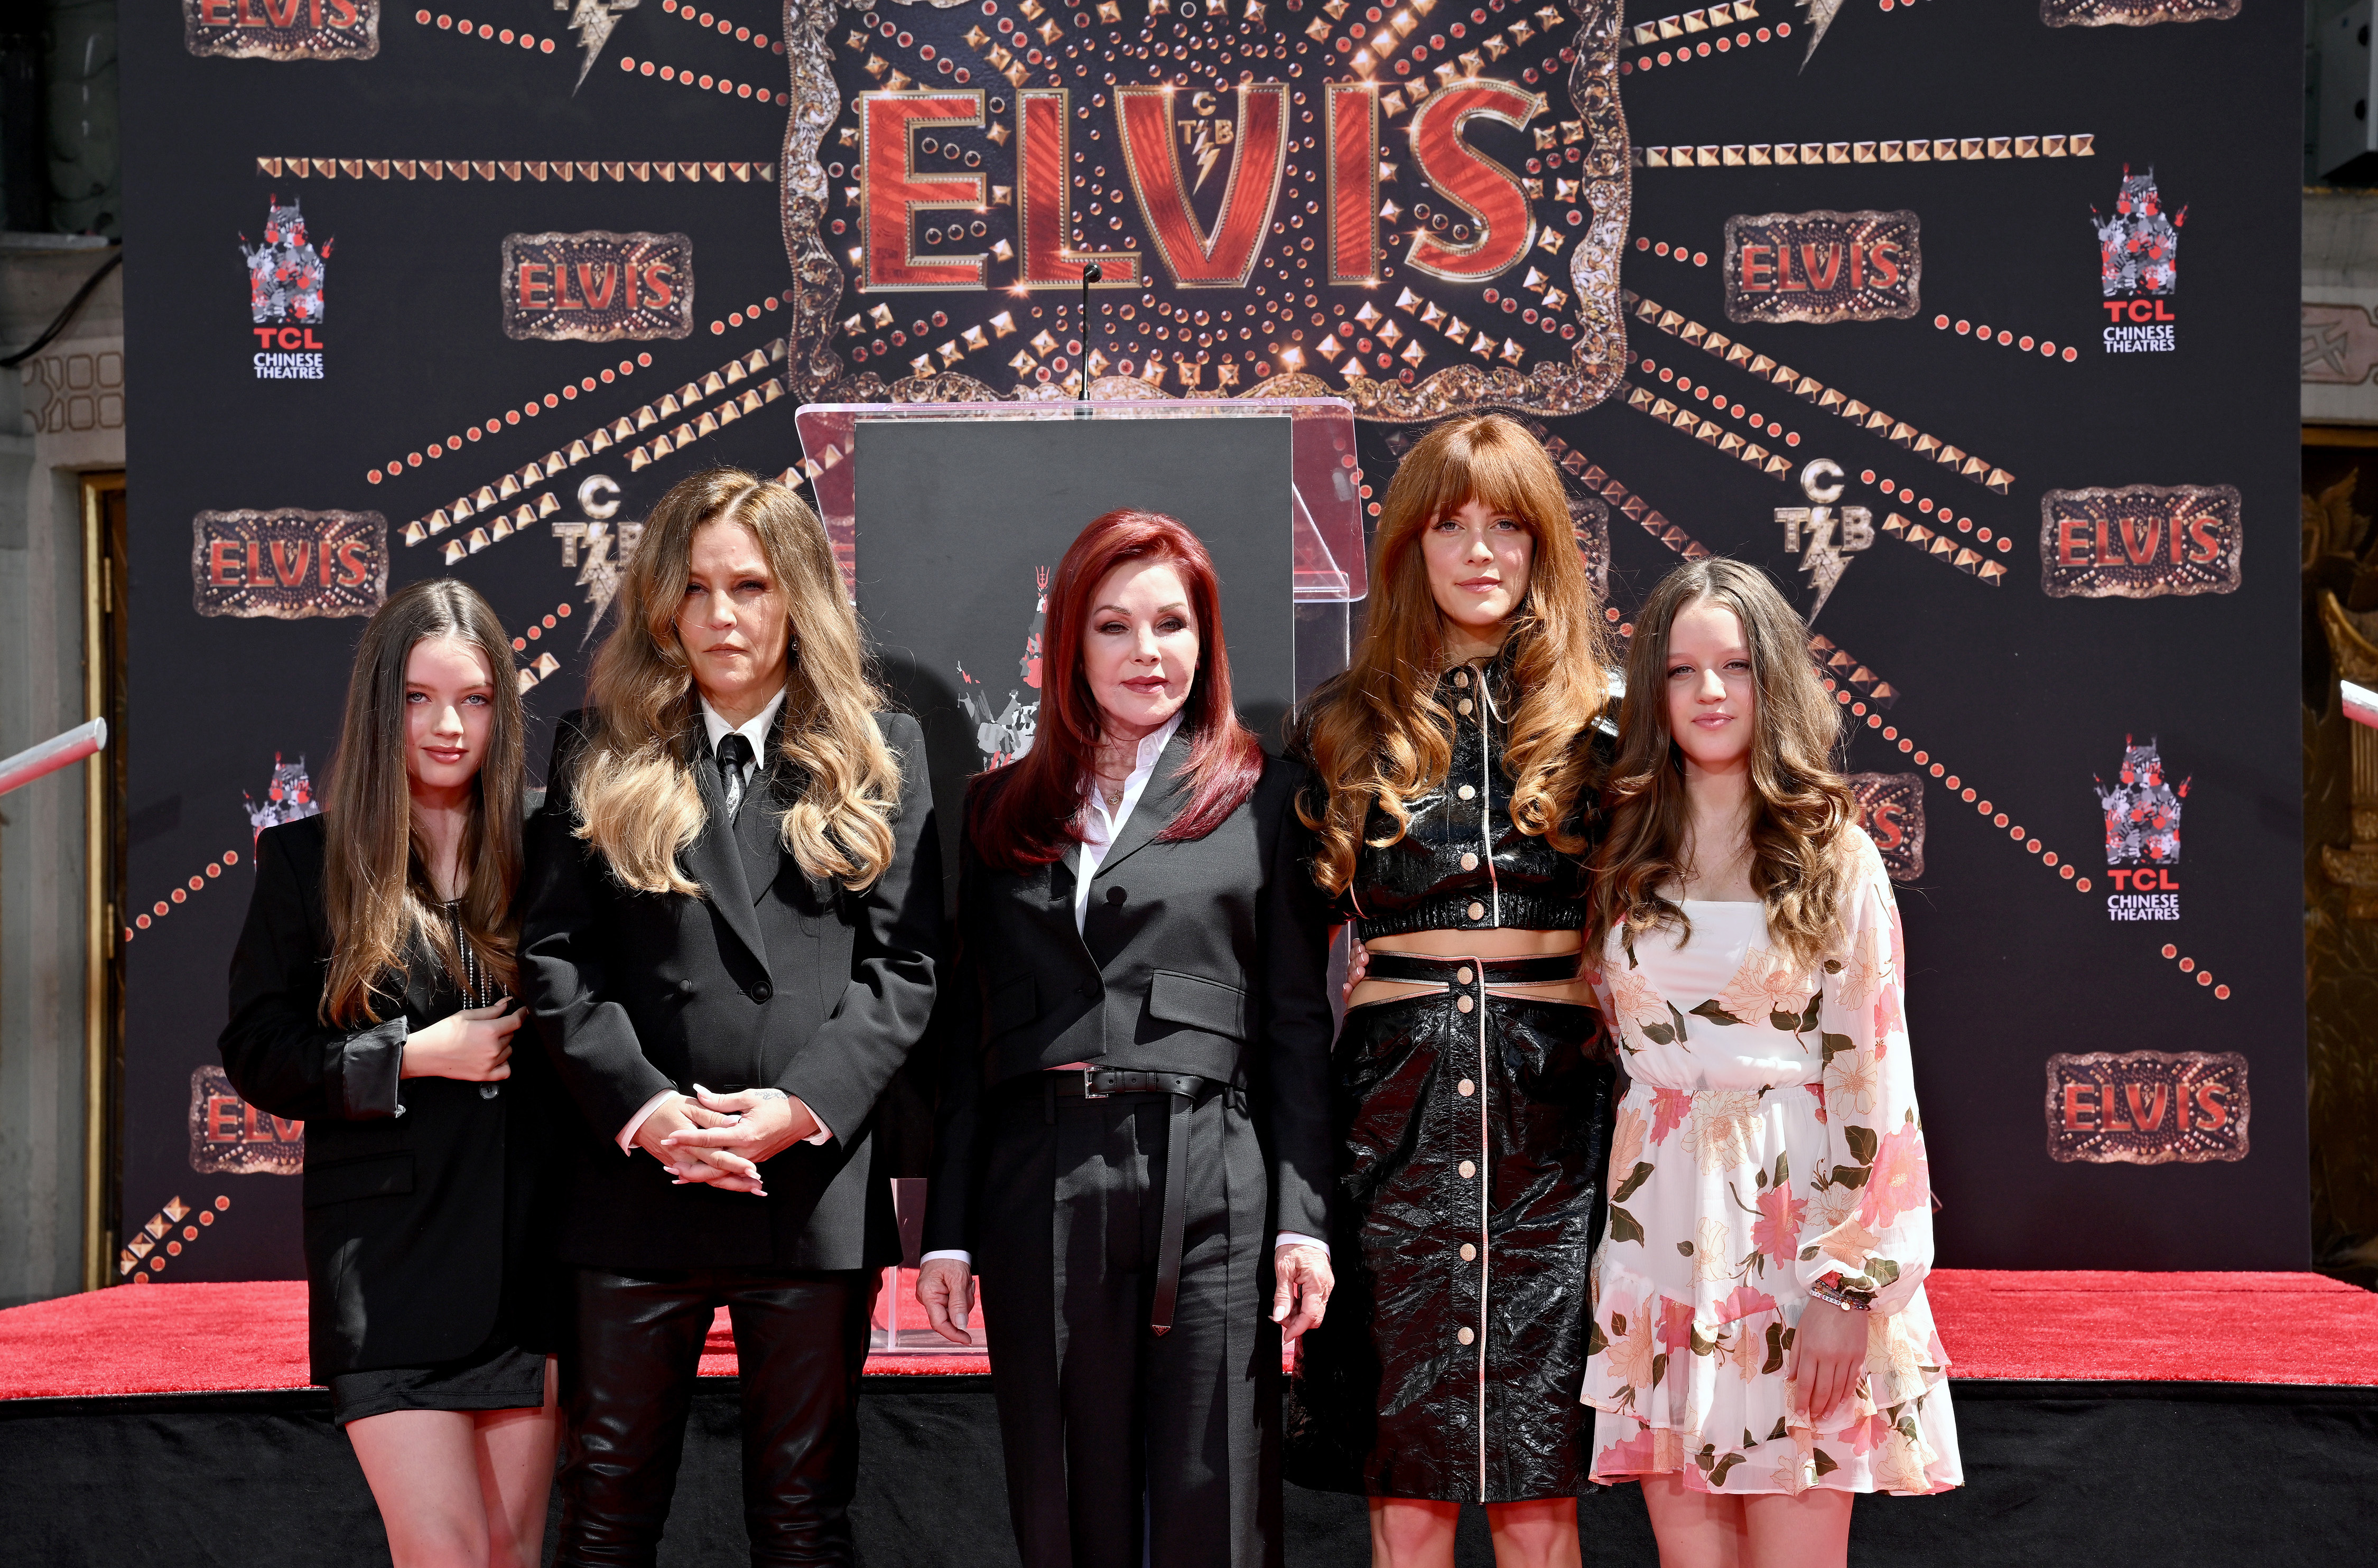 (L-R) Harper Vivienne Ann Lockwood, Lisa Marie Presley, Priscilla Presley, Riley Keough, and Finley Aaron Love Lockwood at TCL Chinese Theatre, on June 21, 2022, in Hollywood, California. | Source: Getty Images